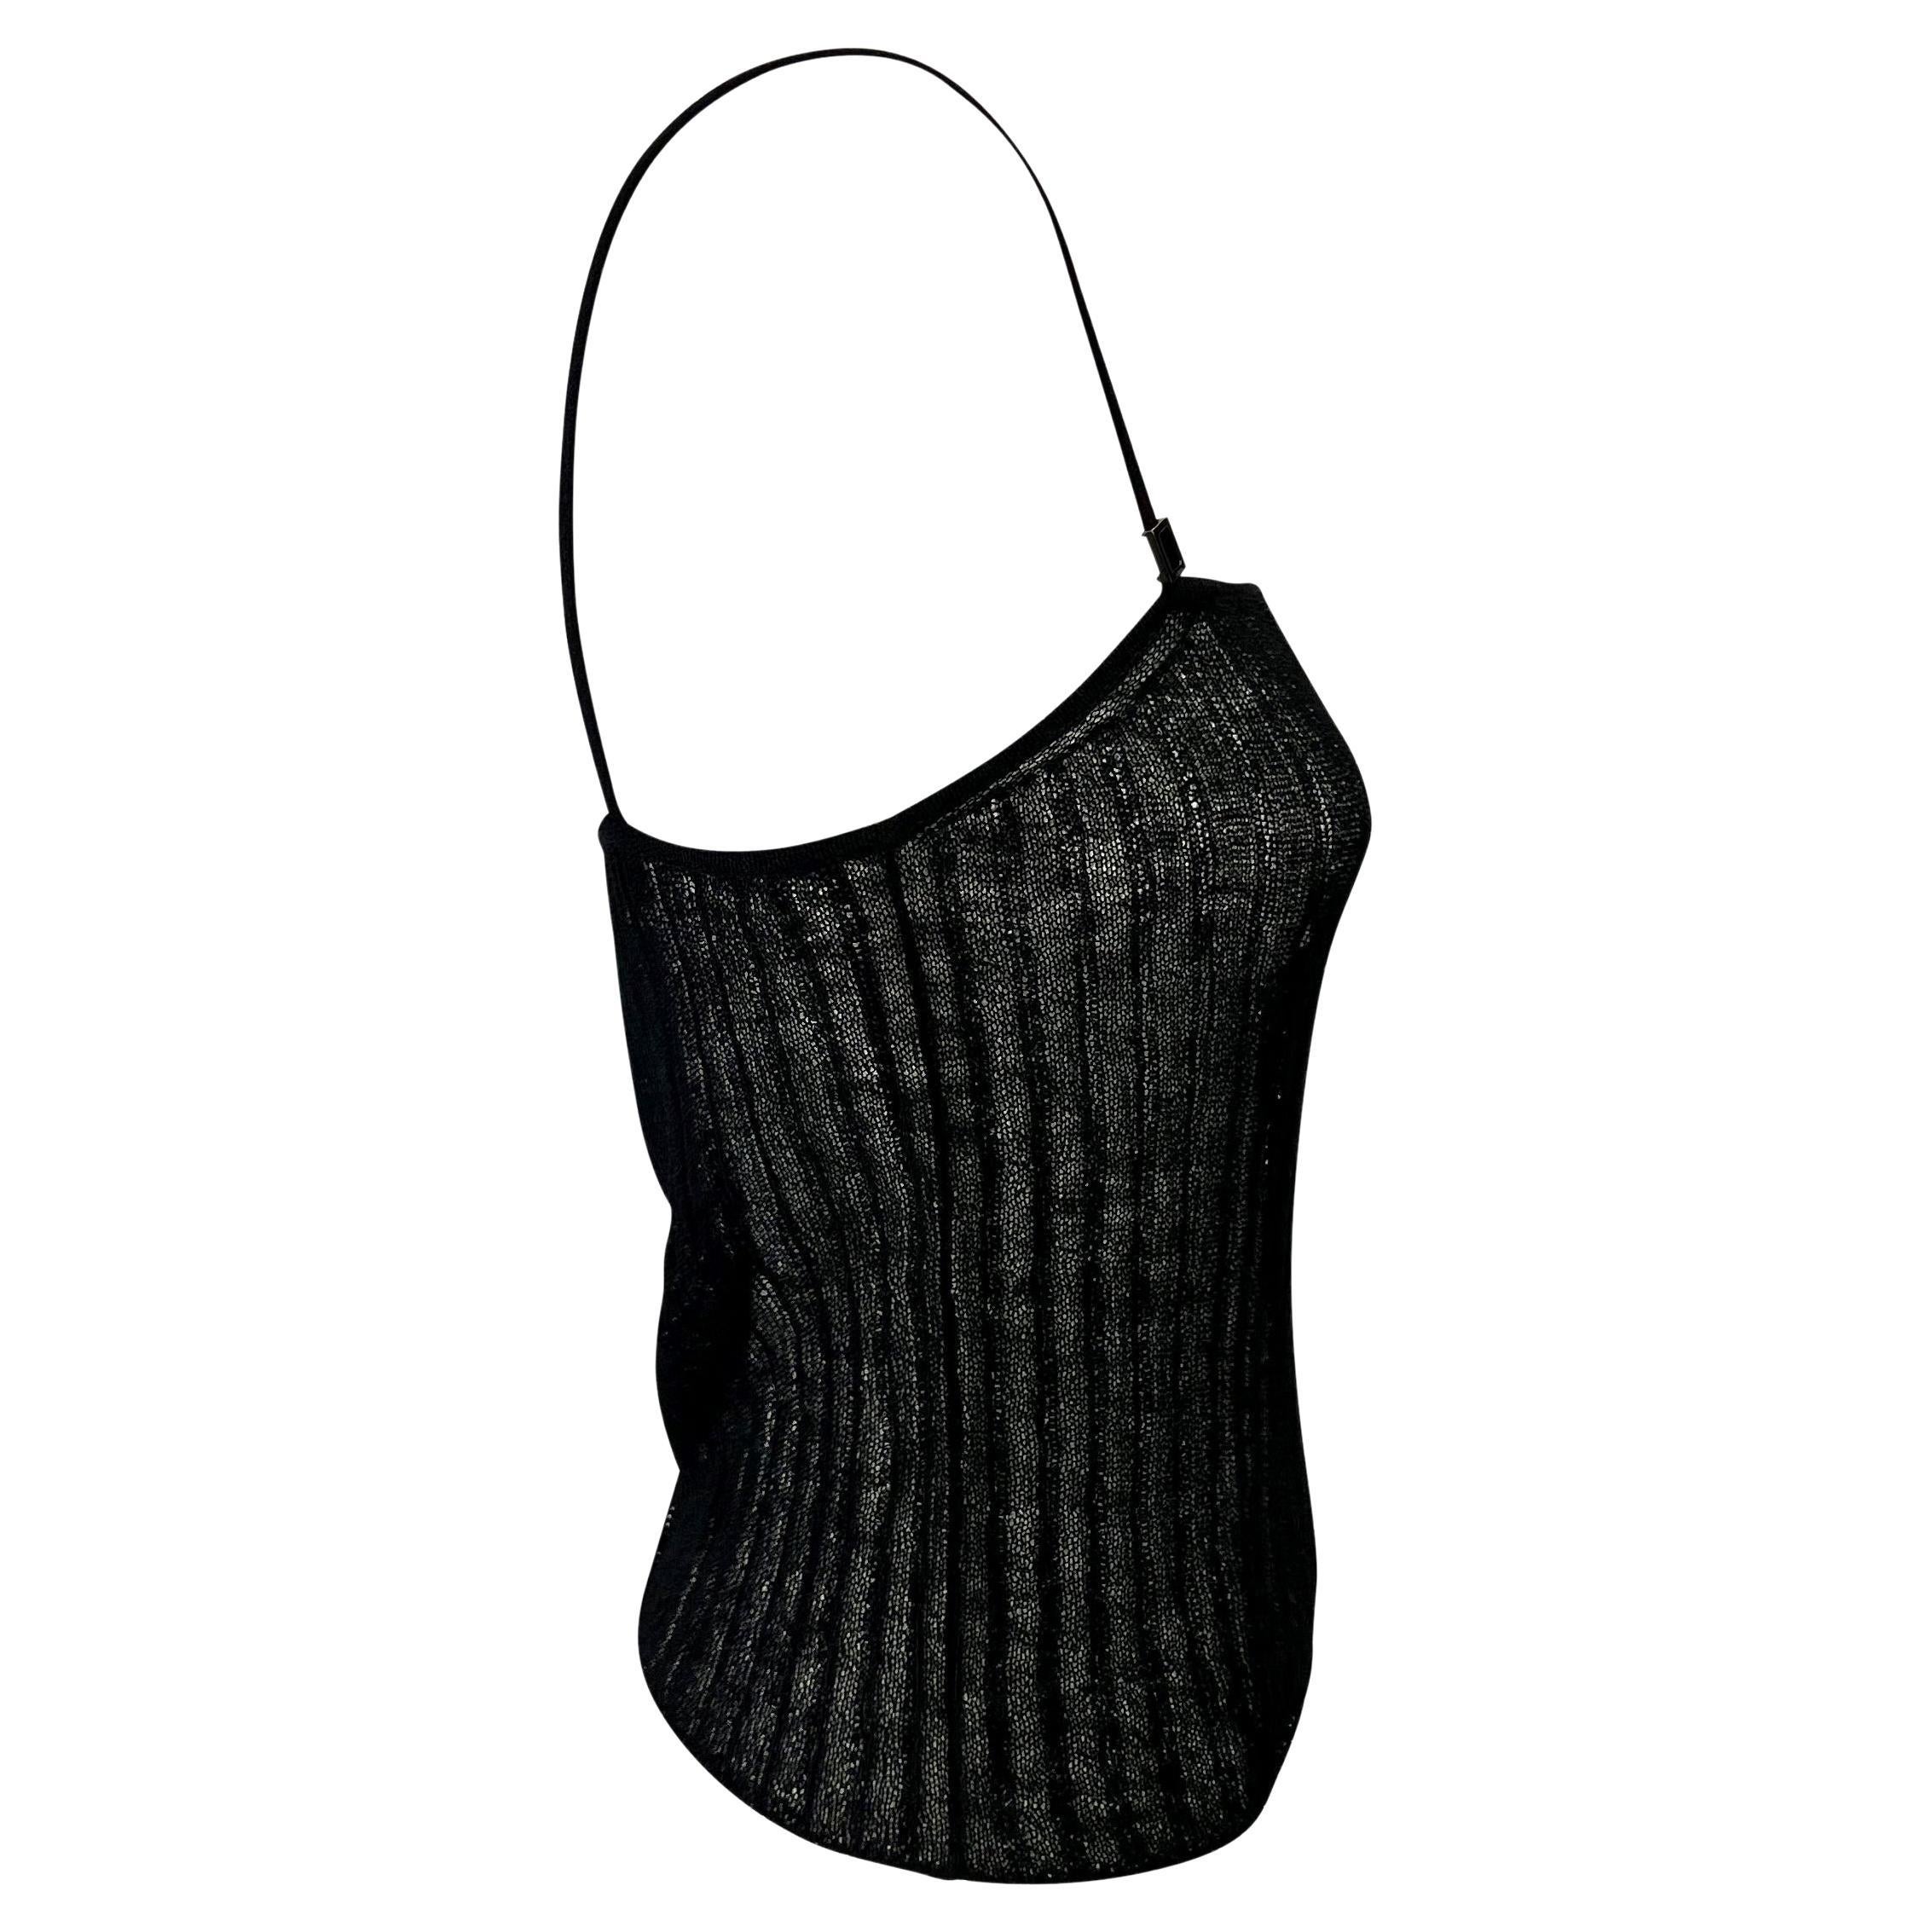 S/S 1998 Gucci by Tom Ford Sheer Knit Logo Buckle Black Stretch Tank Top For Sale 1